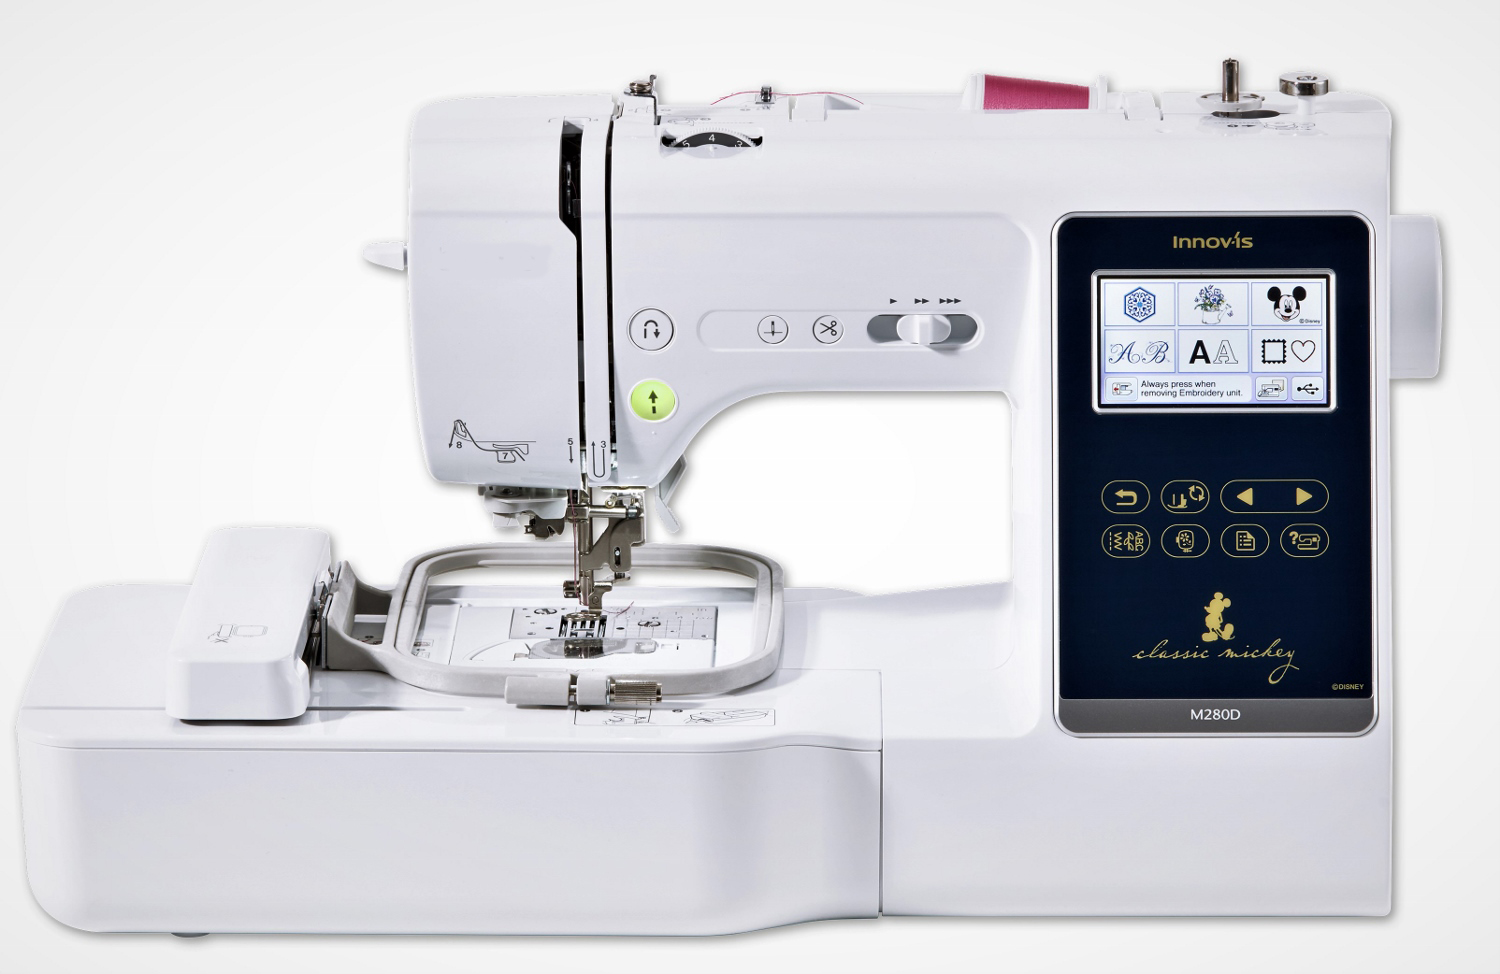 Innov-is M280D Sewing/Embroidery